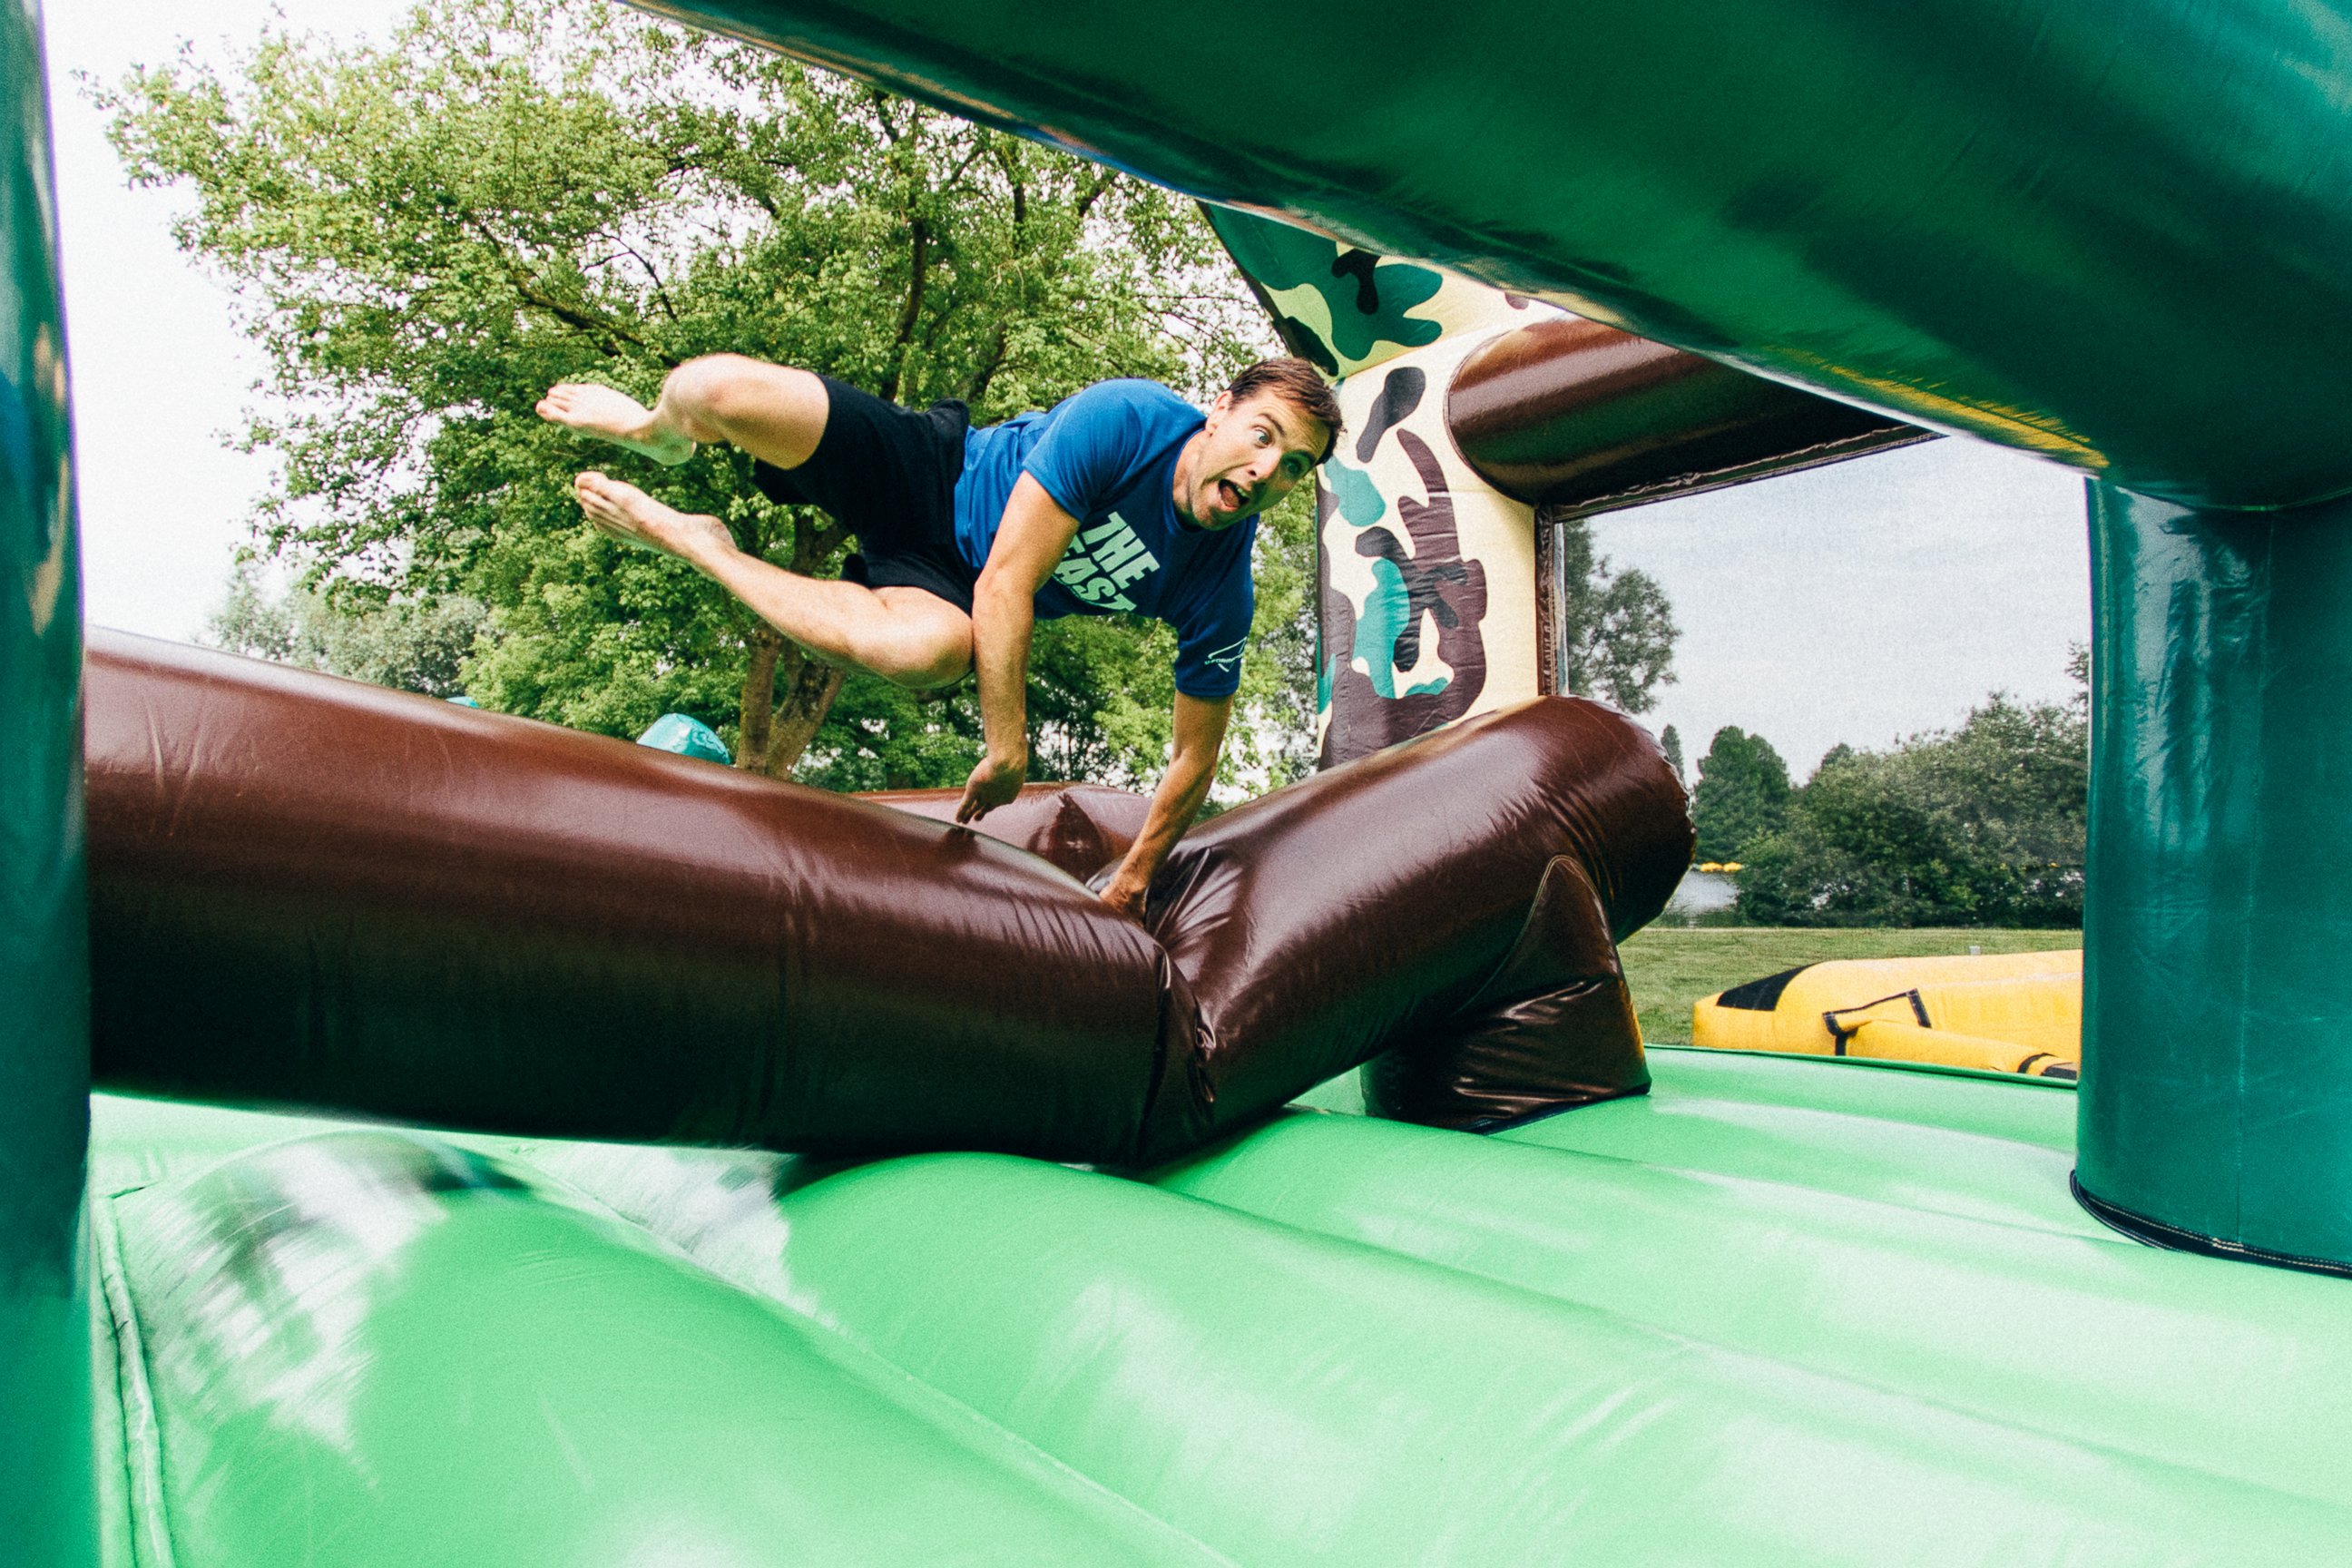 PHOTO: "The Beast" is the world's biggest bouncy castle.